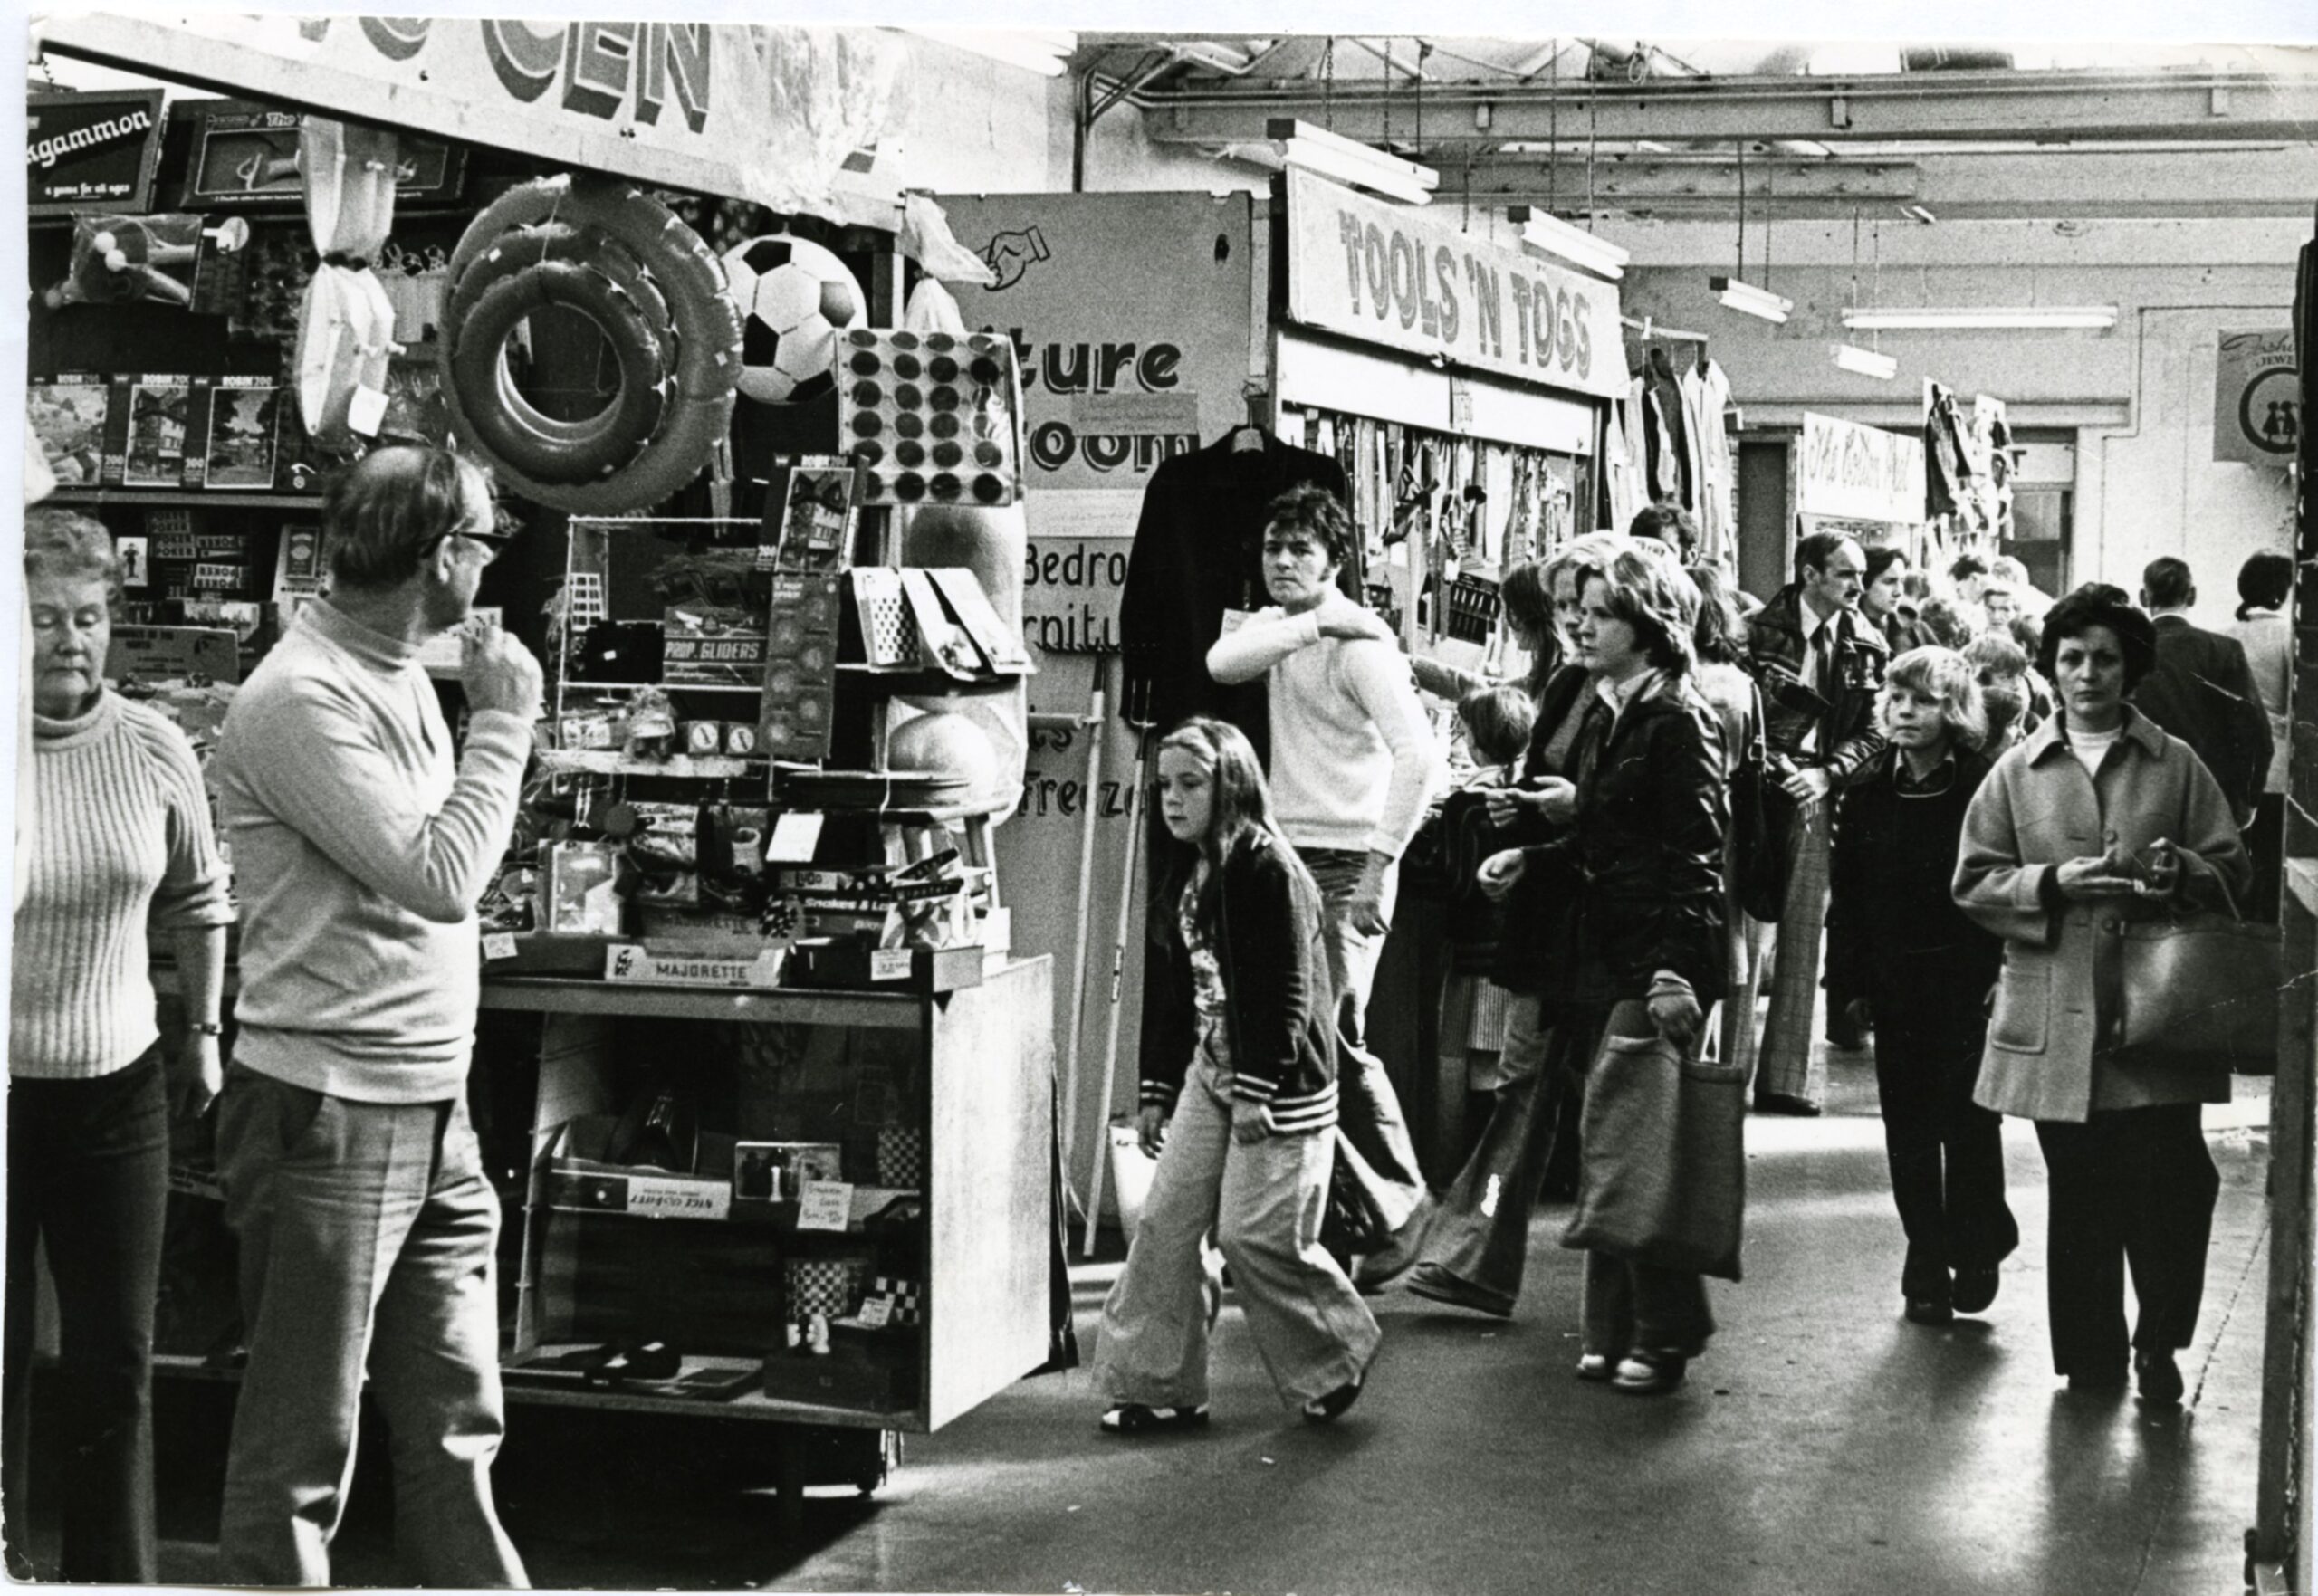 Dens Road Market in 1977 during its first decade of trading.